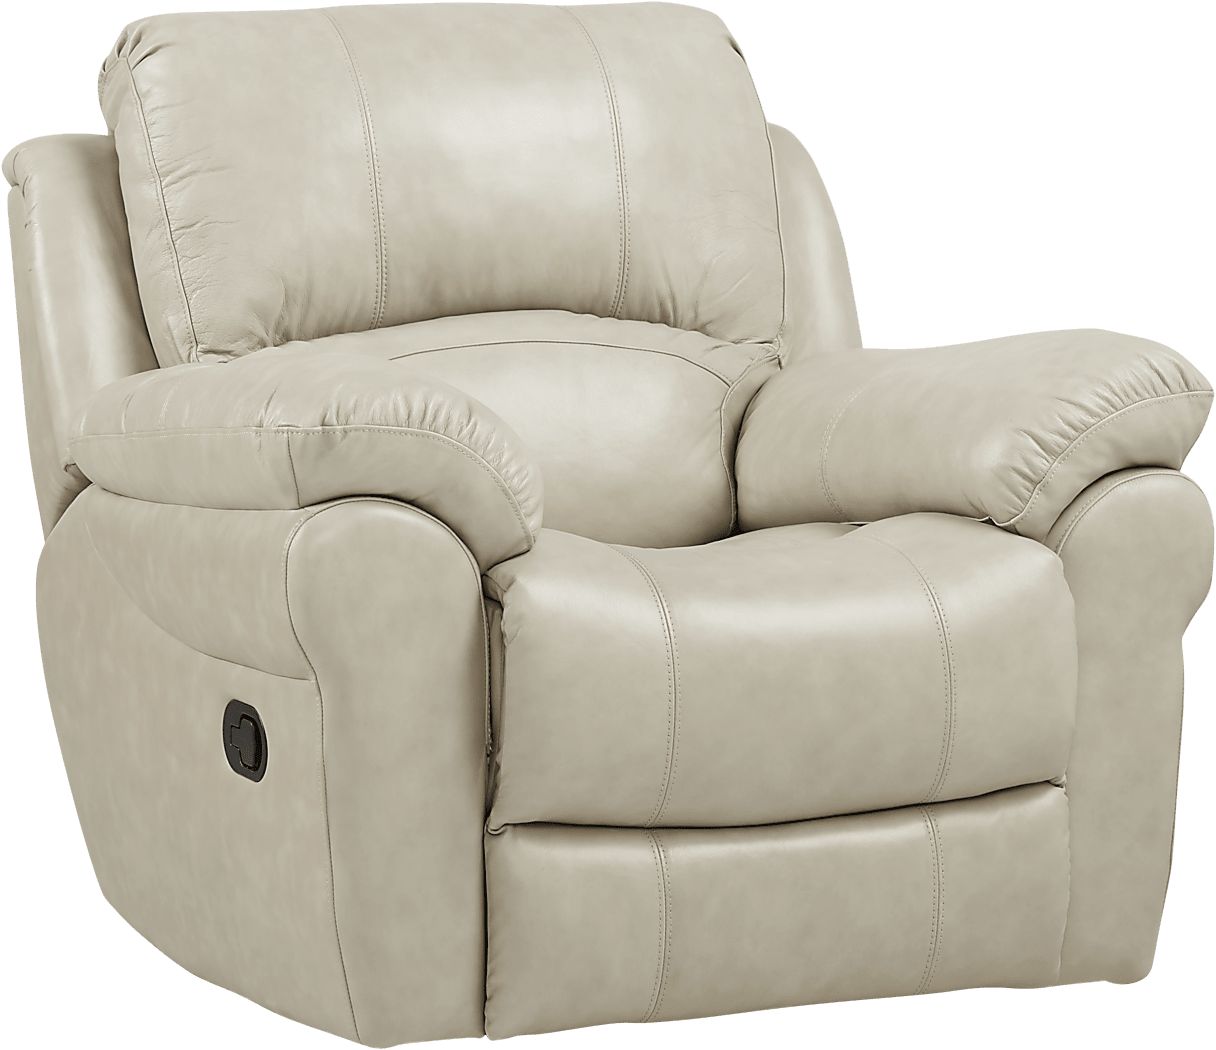 Leather Go Stone Rooms To Beige Rocker Recliner Vercelli -